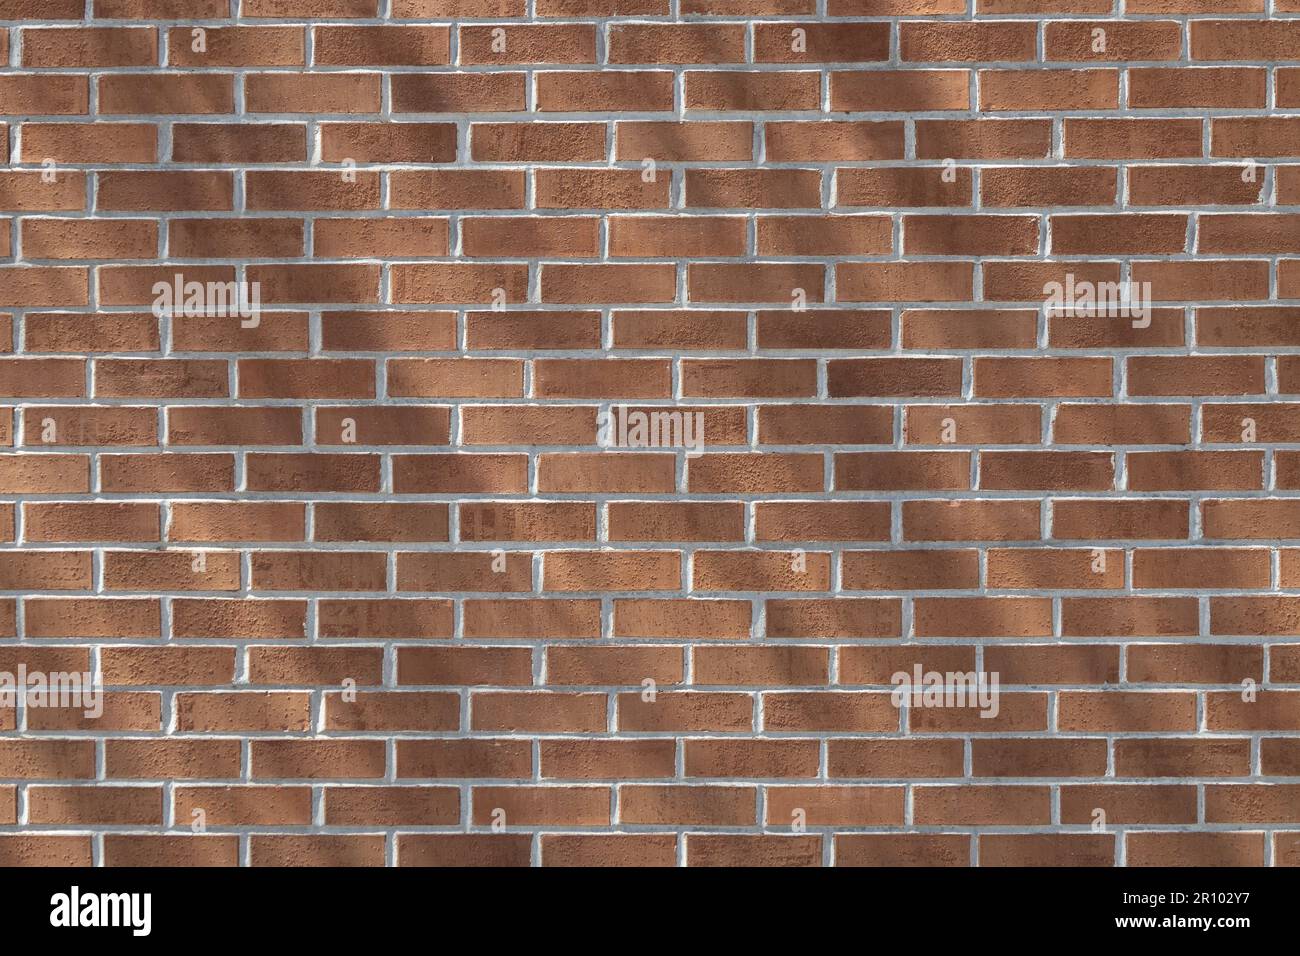 Close up texture background of a modern traditional exterior red clay brick wall in running bond (stretcher bond) pattern, with diagonal shadows Stock Photo